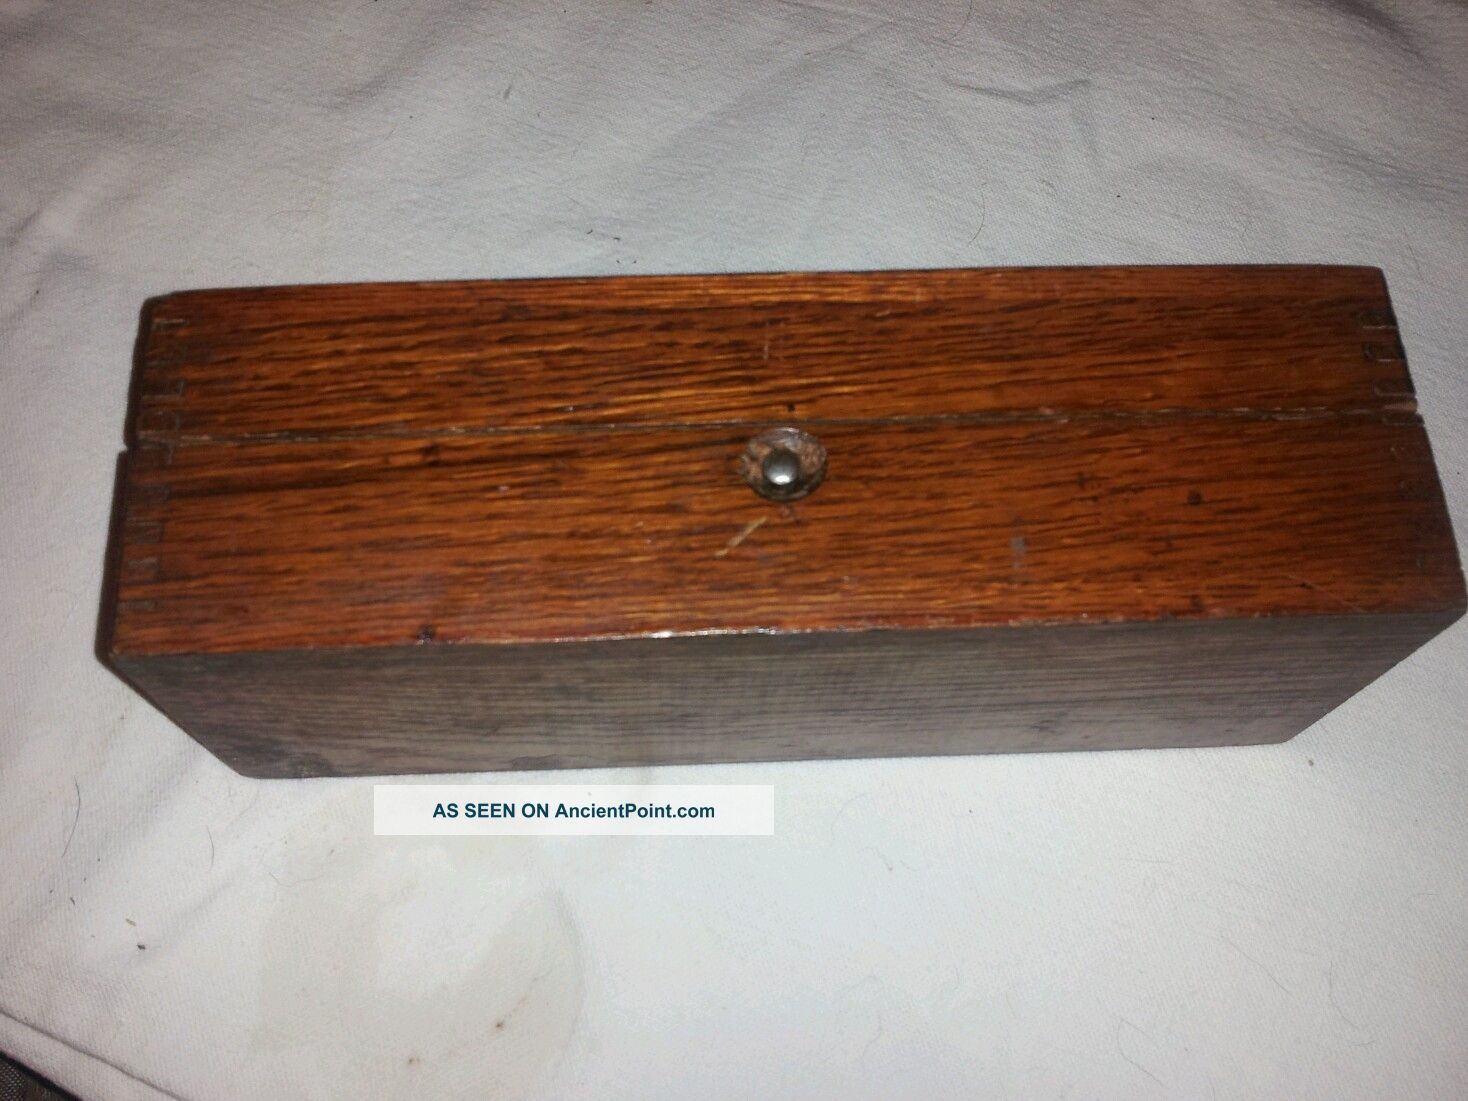 Antique Wooden Sewing Box